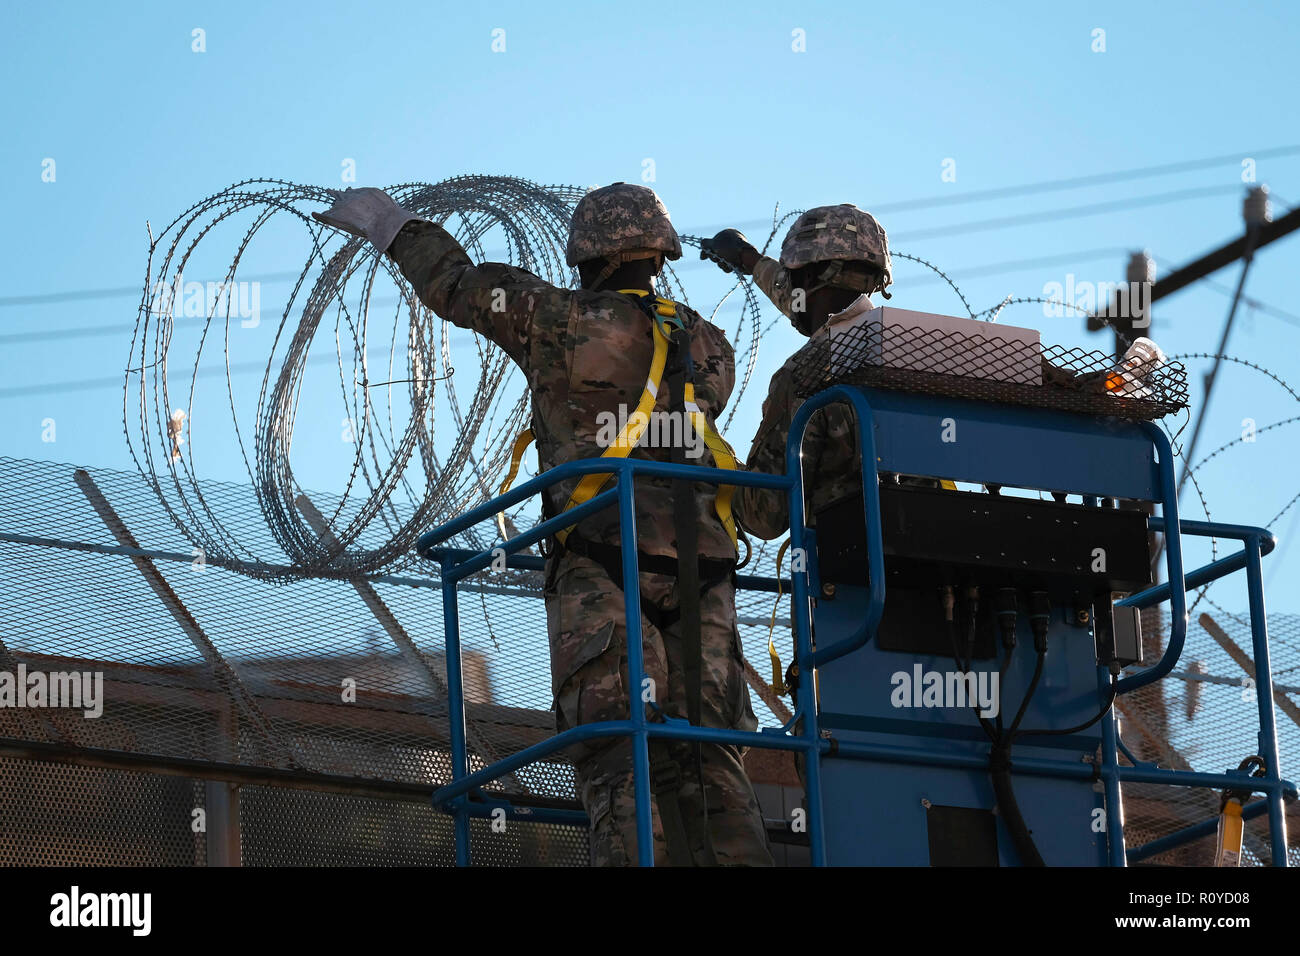 Nogales, Arizona, USA. 7th Nov, 2018. The US Army laying barbed wire on top of the border wall at international border station in Nogales, Arizona. The soldiers are part of the 5,000 troops that President Trump has ordered the Pentagon to dispatch to the Southwest border to assist the US Border Patrol in advance of the possible arrival of caravans of Central American migrants. Credit: Christopher Brown/ZUMA Wire/Alamy Live News Stock Photo